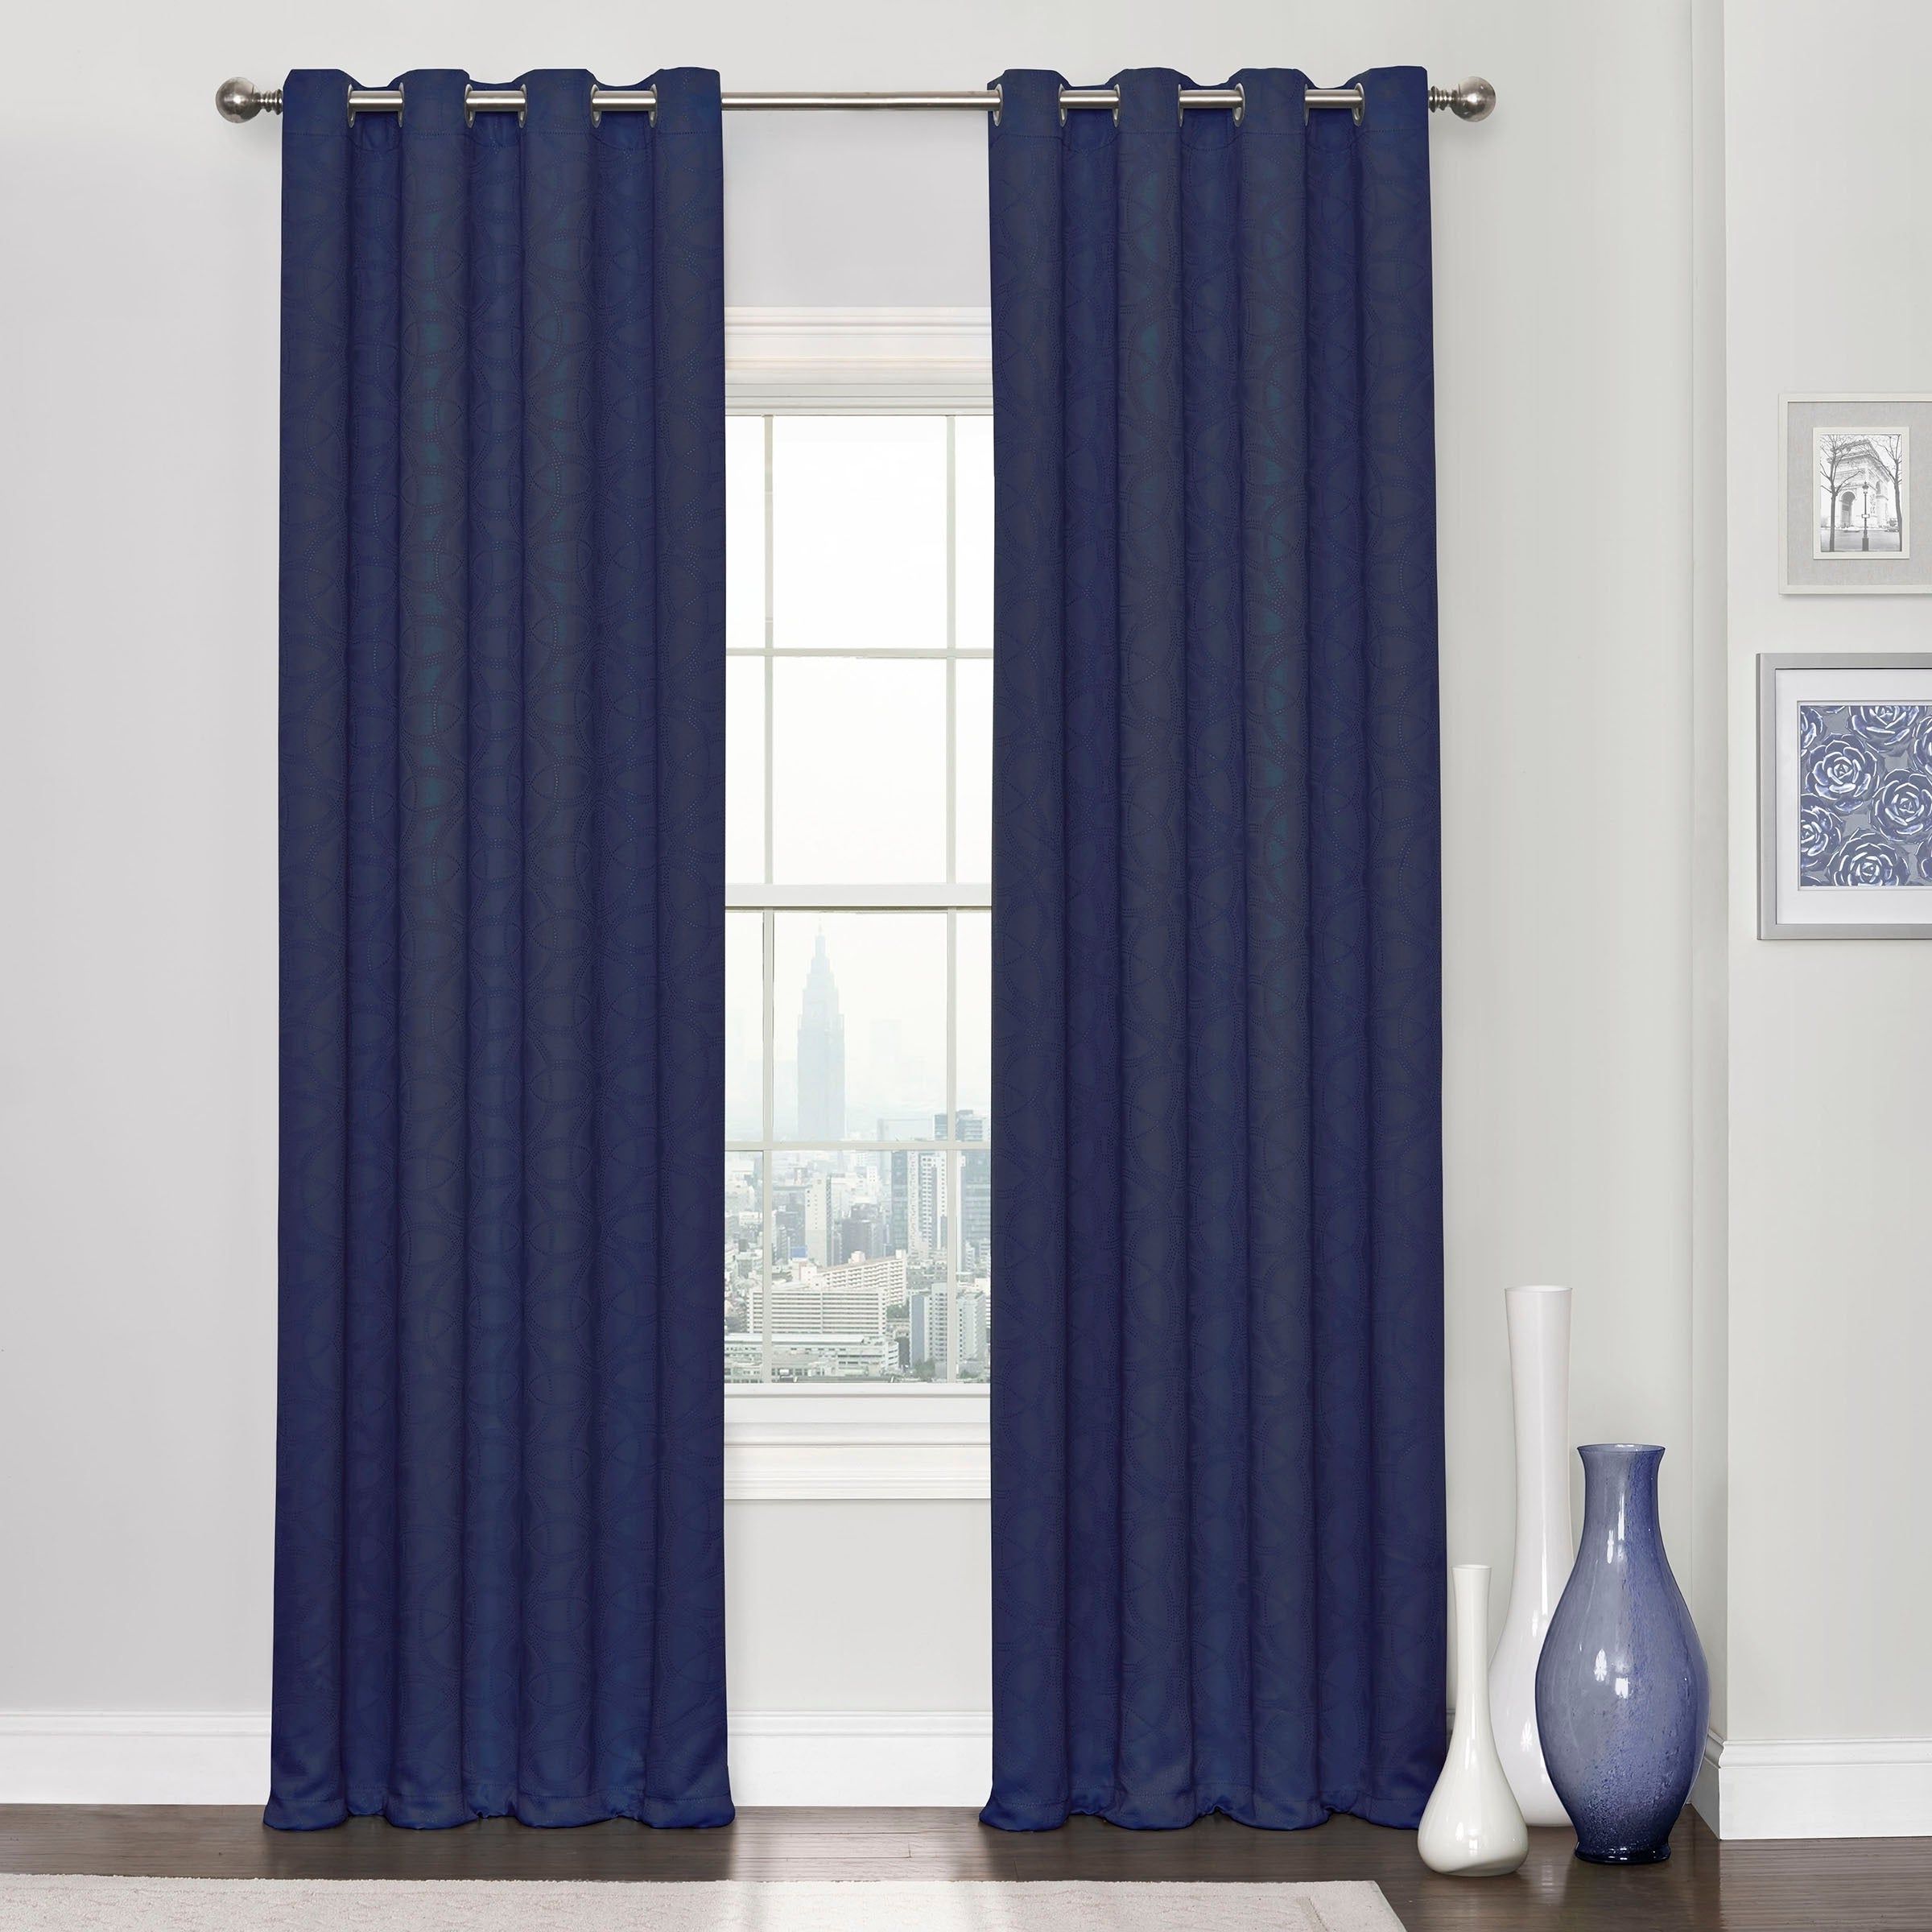 Favorite Eclipse Darrell Thermaweave Blackout Window Curtain Panels In Details About Eclipse Kingston Thermaweave Blackout Curtains (View 10 of 20)